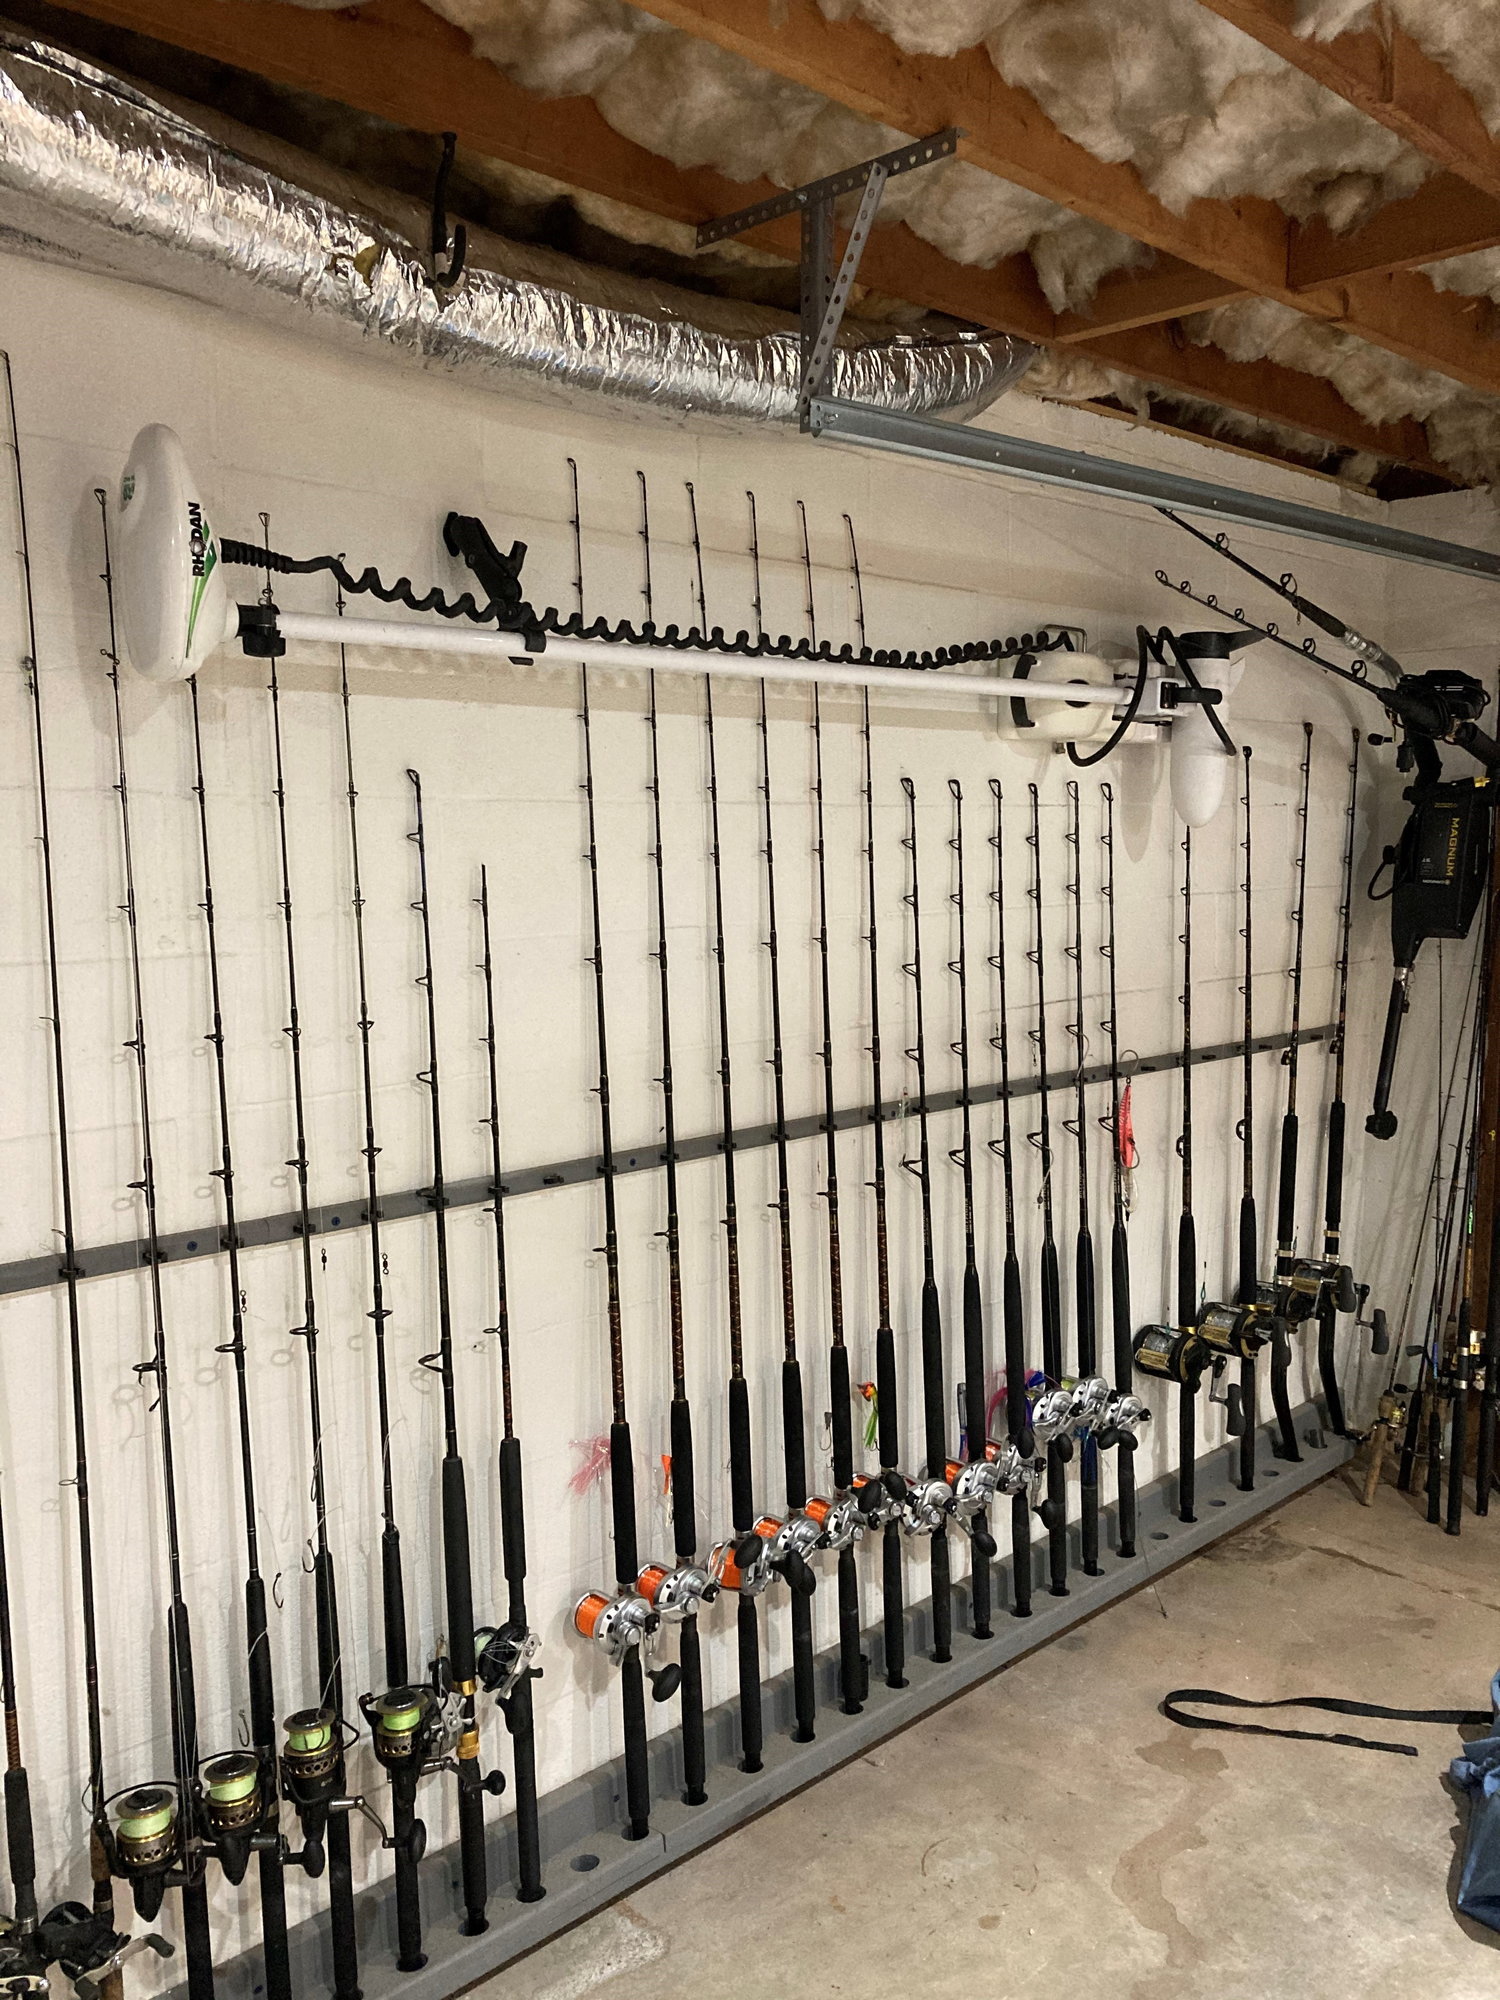 Garage rod/tackle storage ideas? - The Hull Truth - Boating and Fishing  Forum